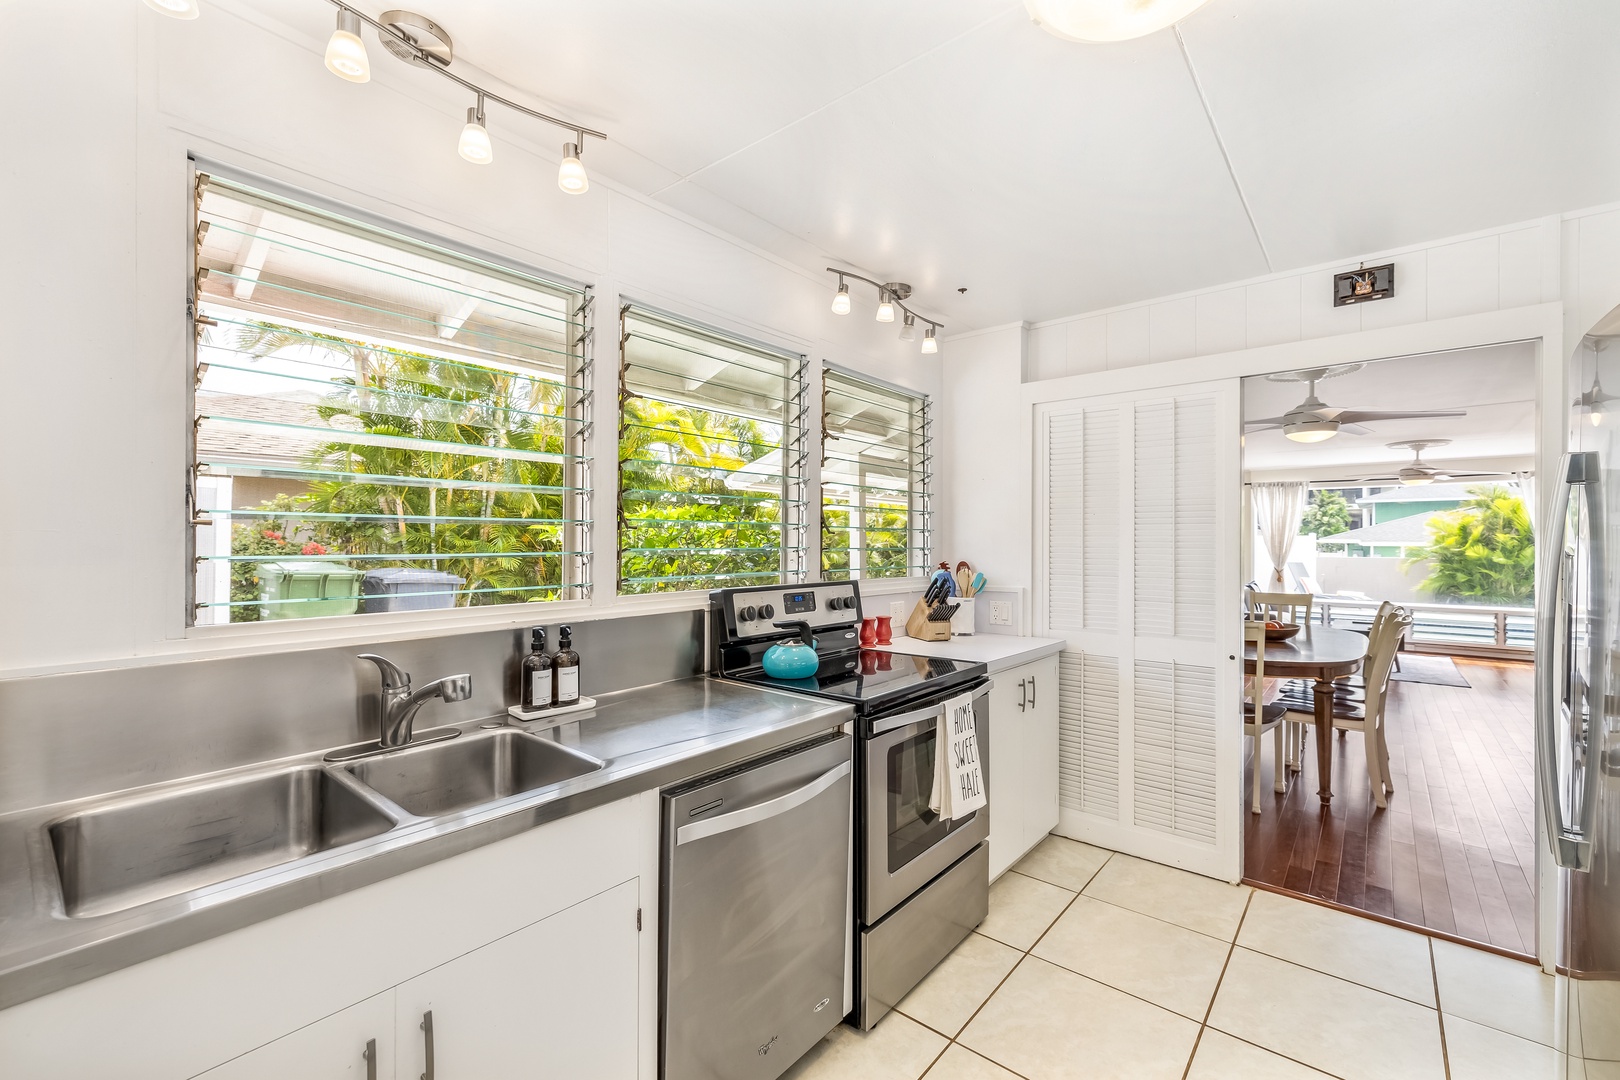 Honolulu Vacation Rentals, Kahala Cottage - Prep your meals with outdoor views.